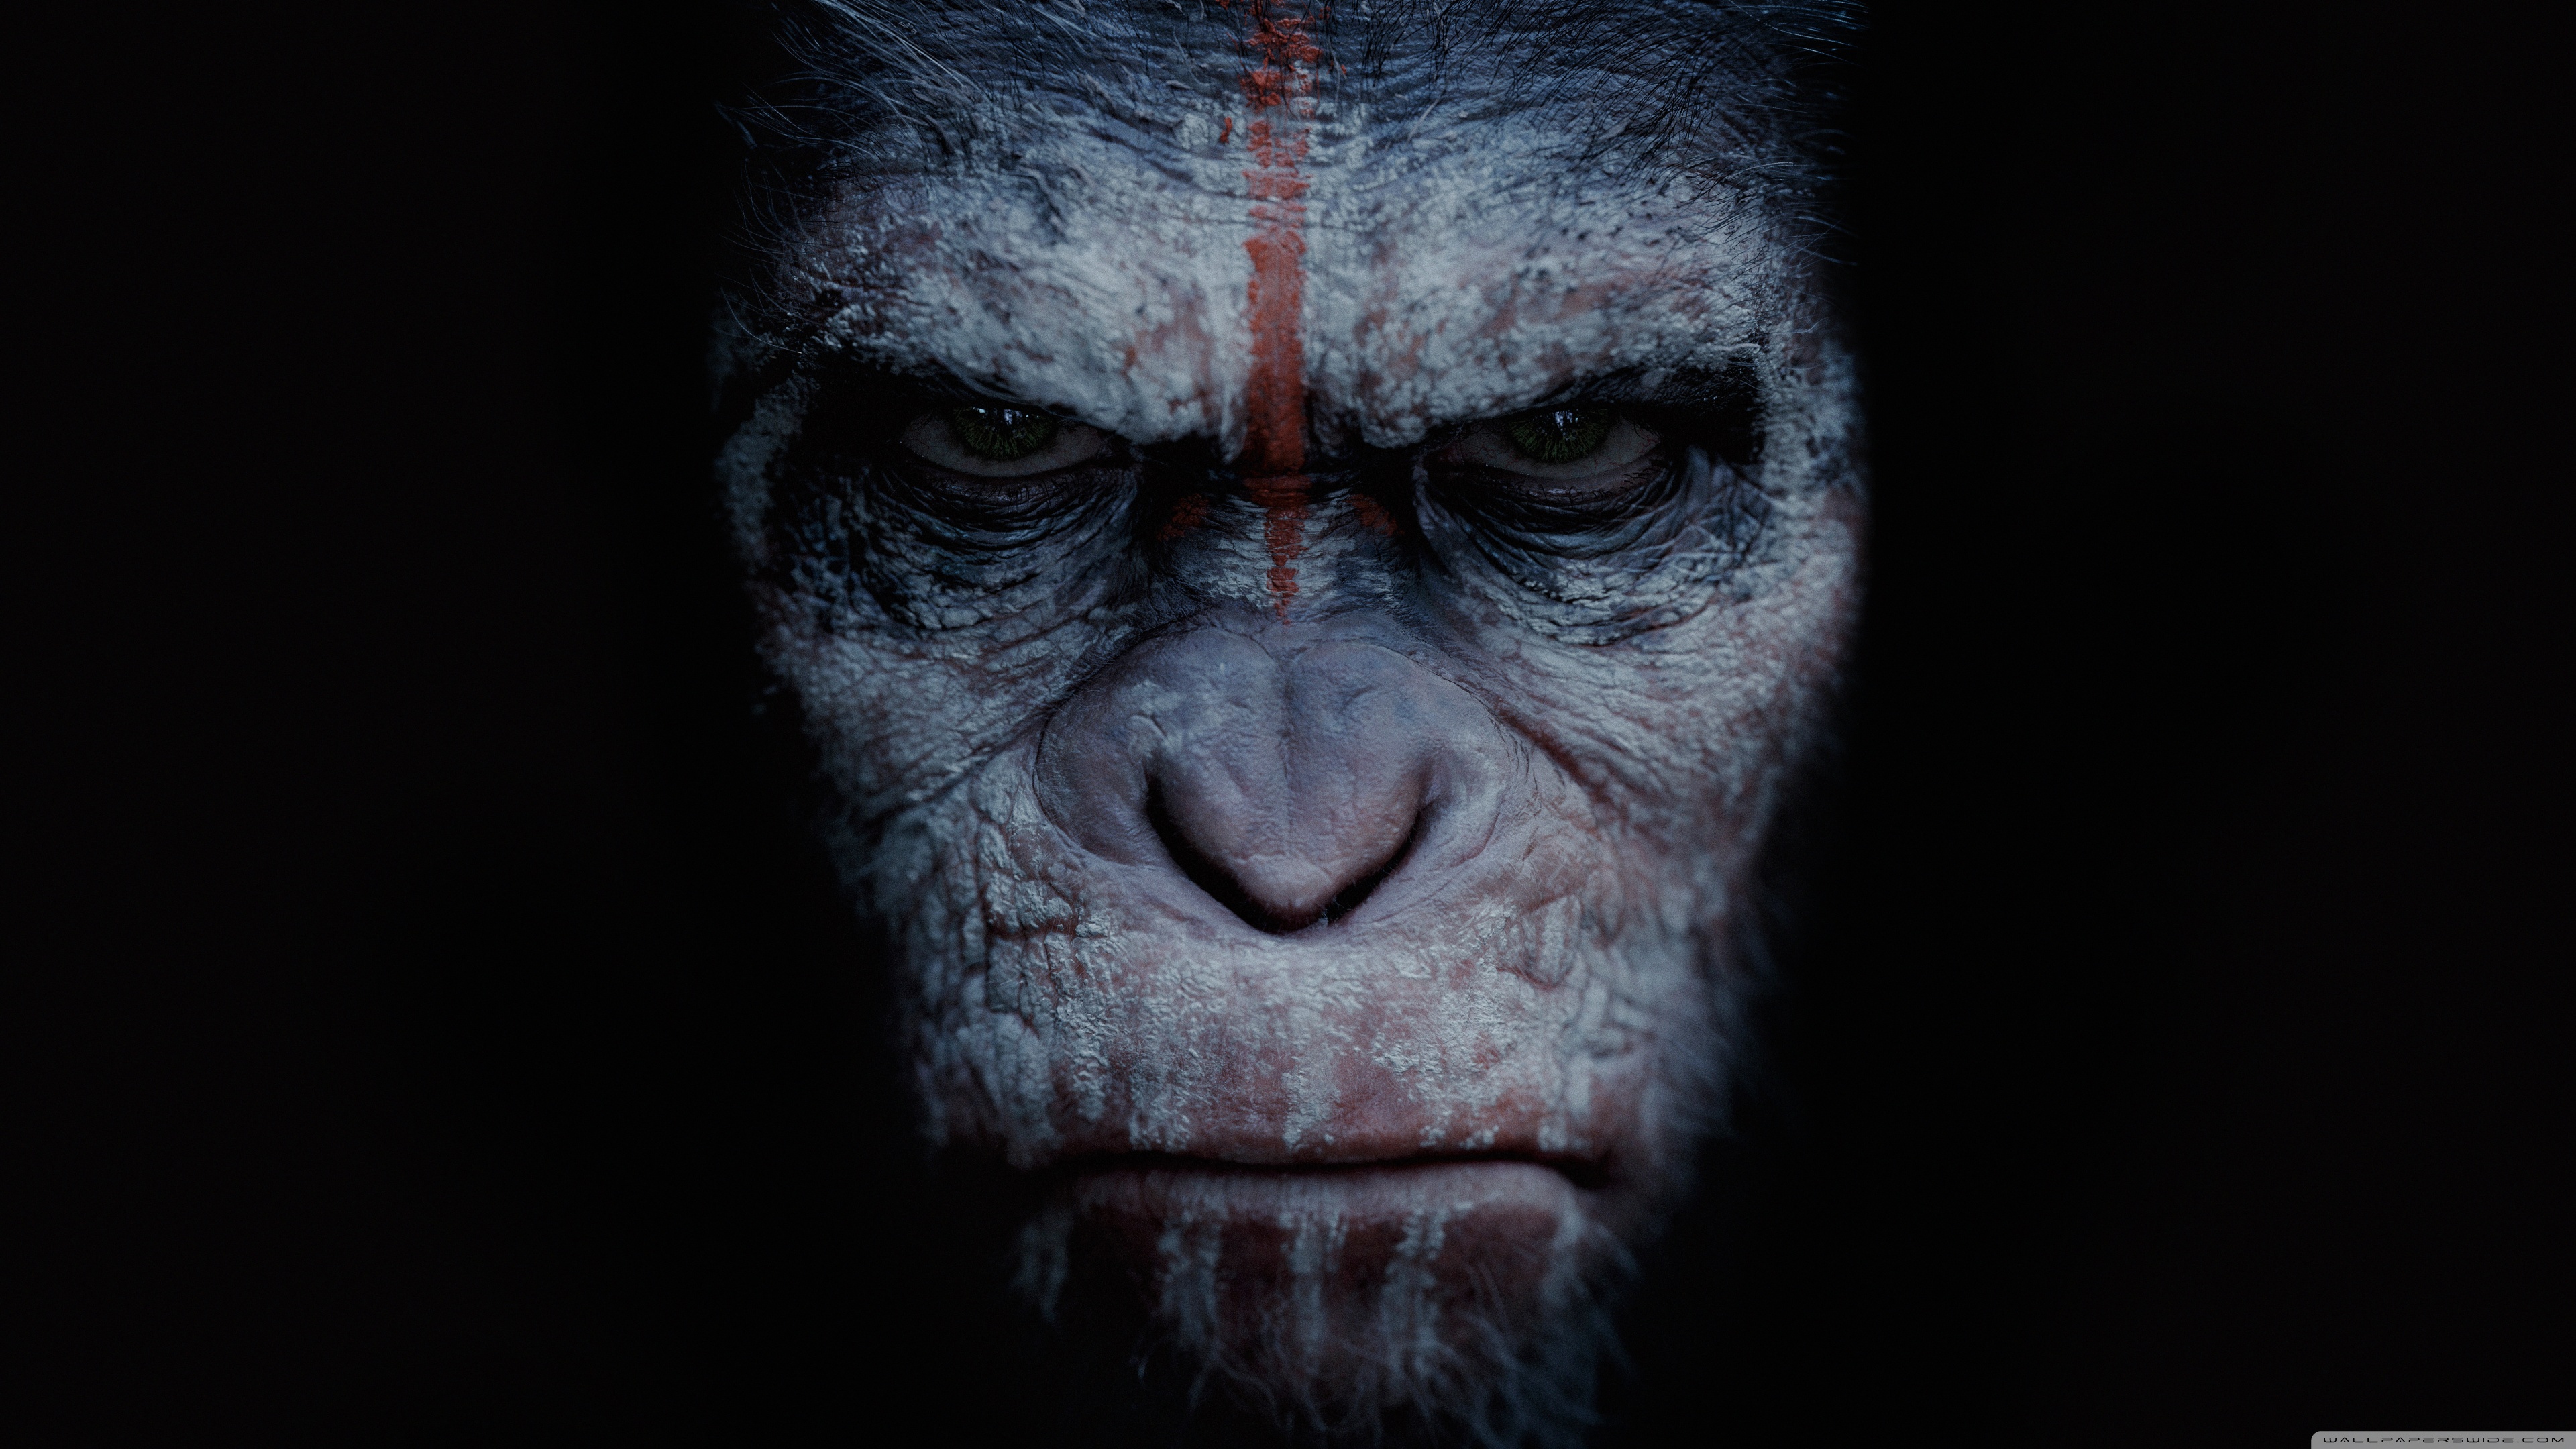 Dawn of the Planet of the Apes Wallpaper